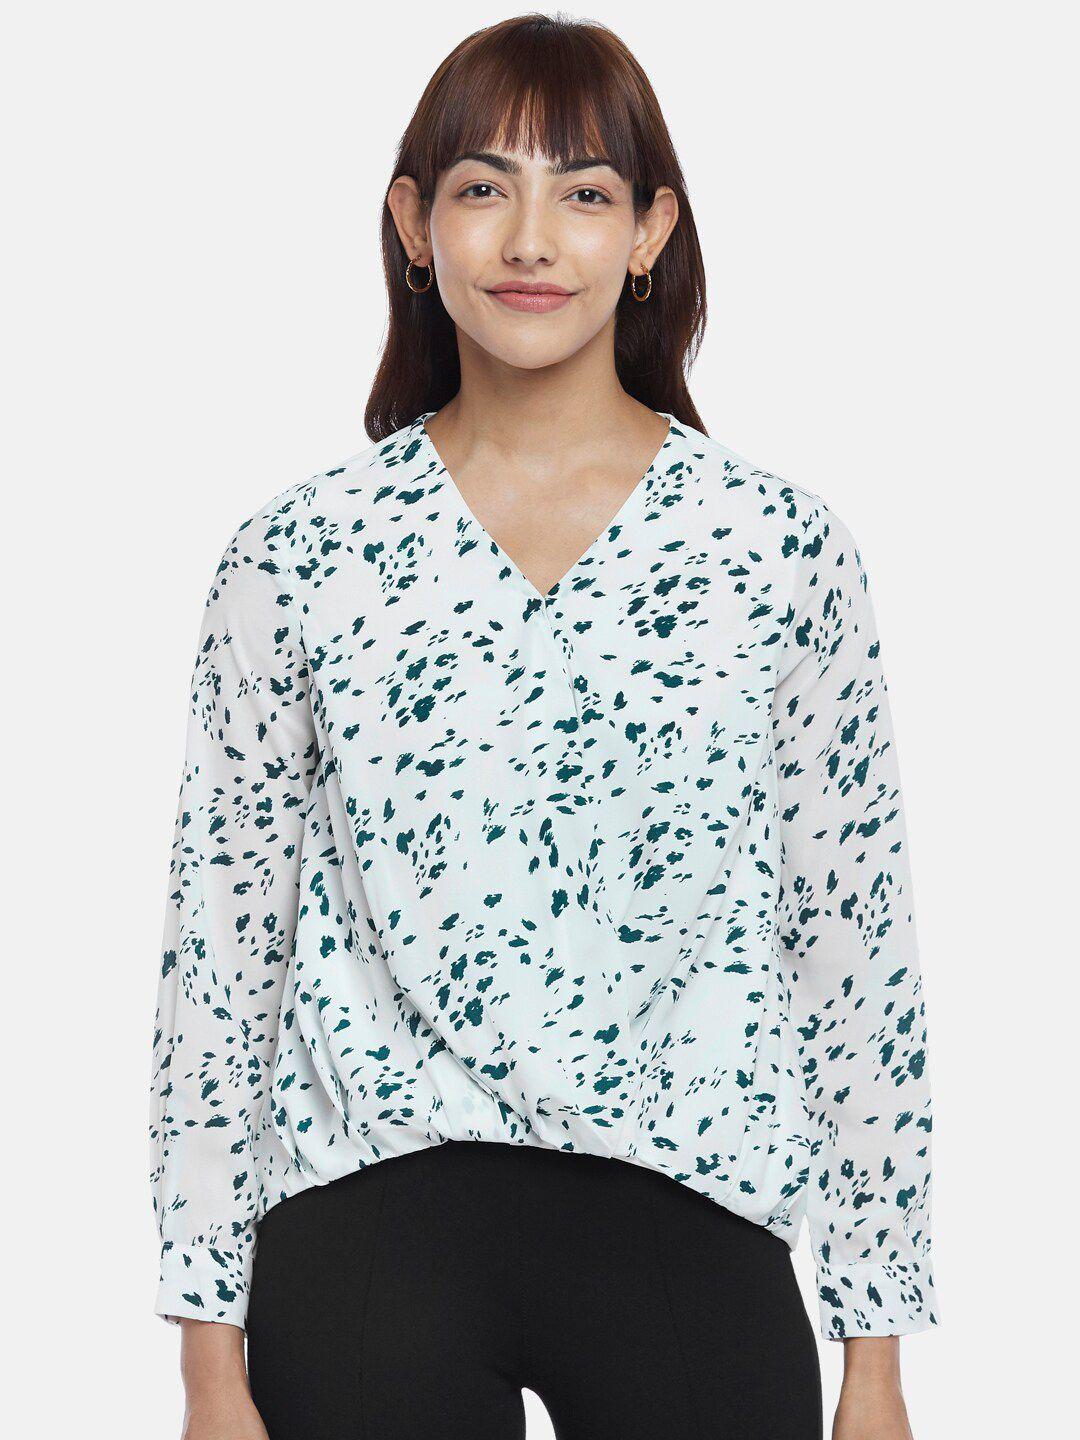 annabelle by pantaloons women off white and green abstract print v neck frill top